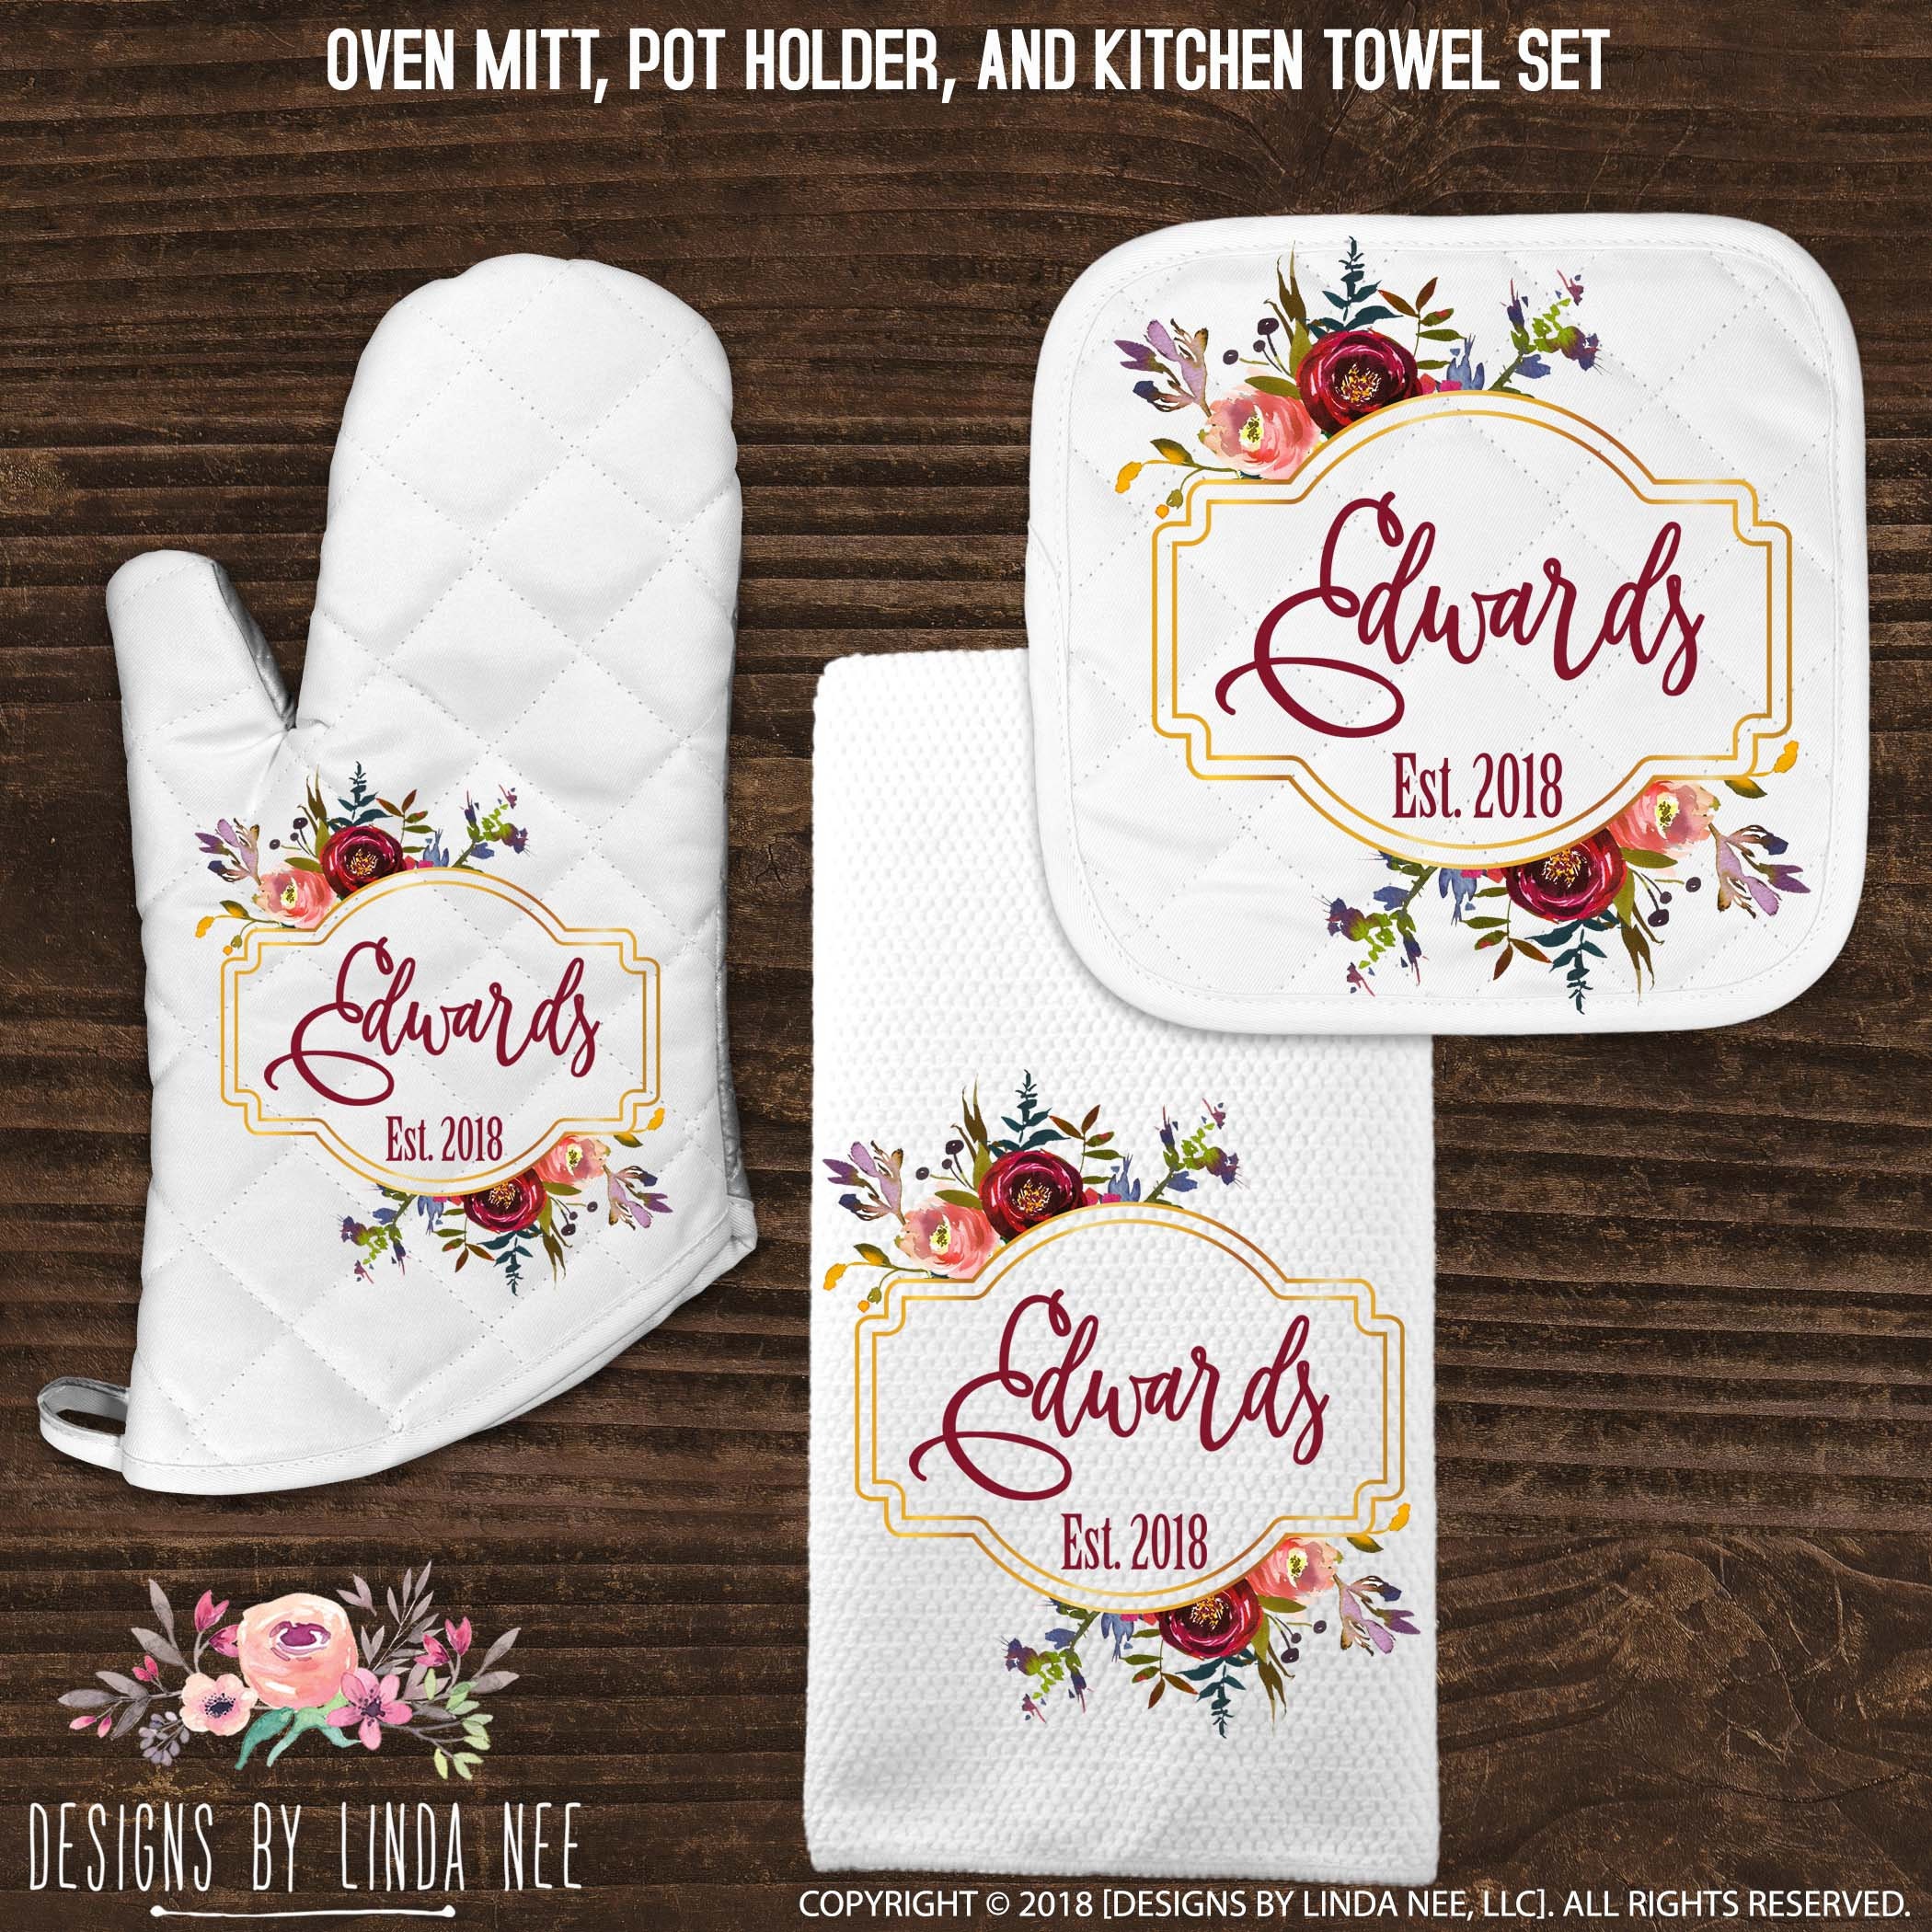 Customized Oven Mitt, Personalized Oven Mitt, Personalized Kitchen Gift,  Personalized Pot Holder, Mothers Day Gift, Printed Oven Mitts 